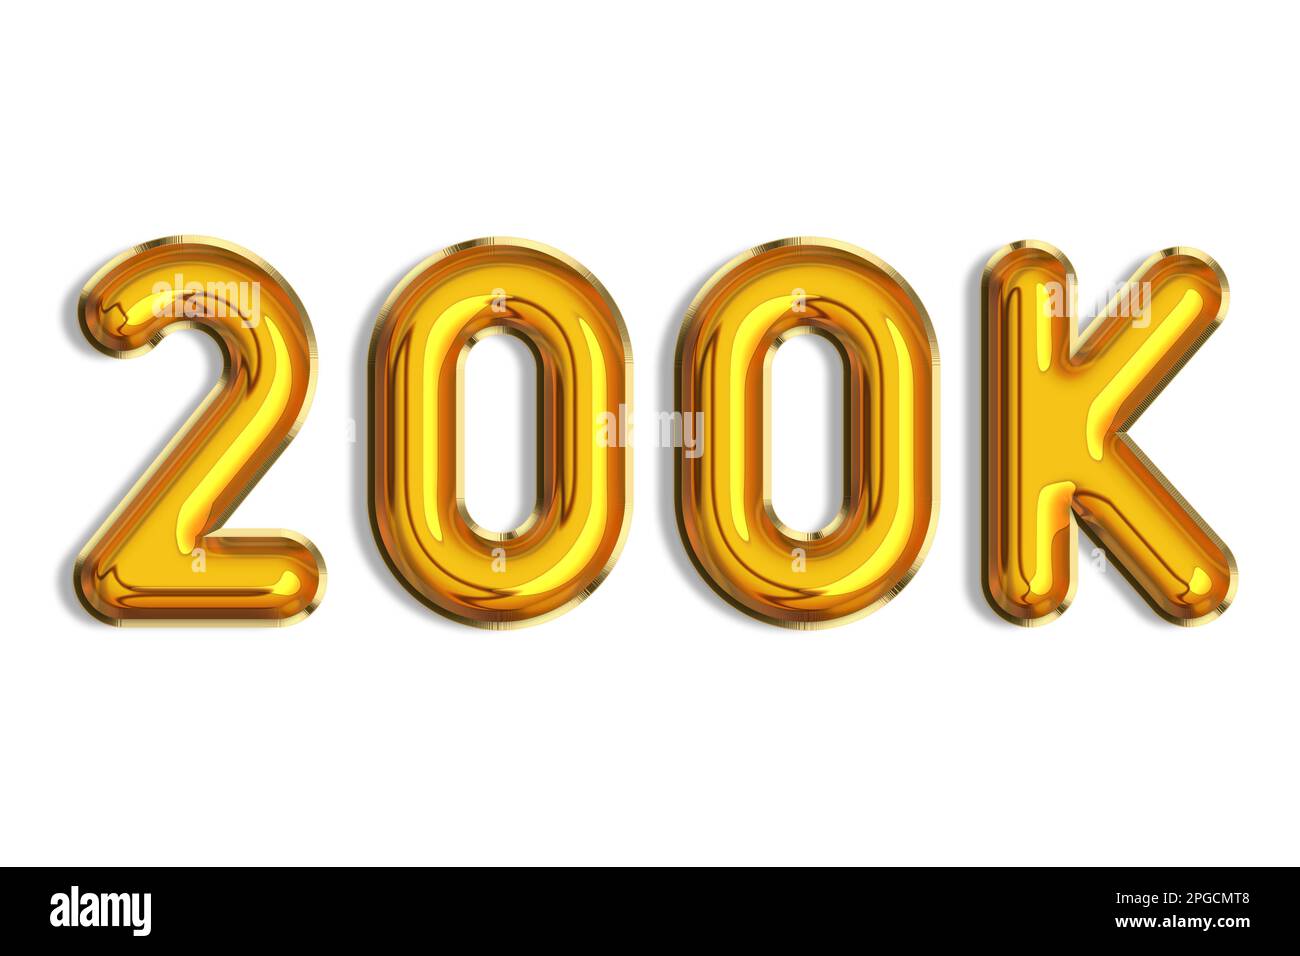 200 or two hundred. Banner, realistic 3d gold helium balloons, logo. Numbers isolated on white. Lettering. Graphic font, shiny text. Illustration for Stock Photo